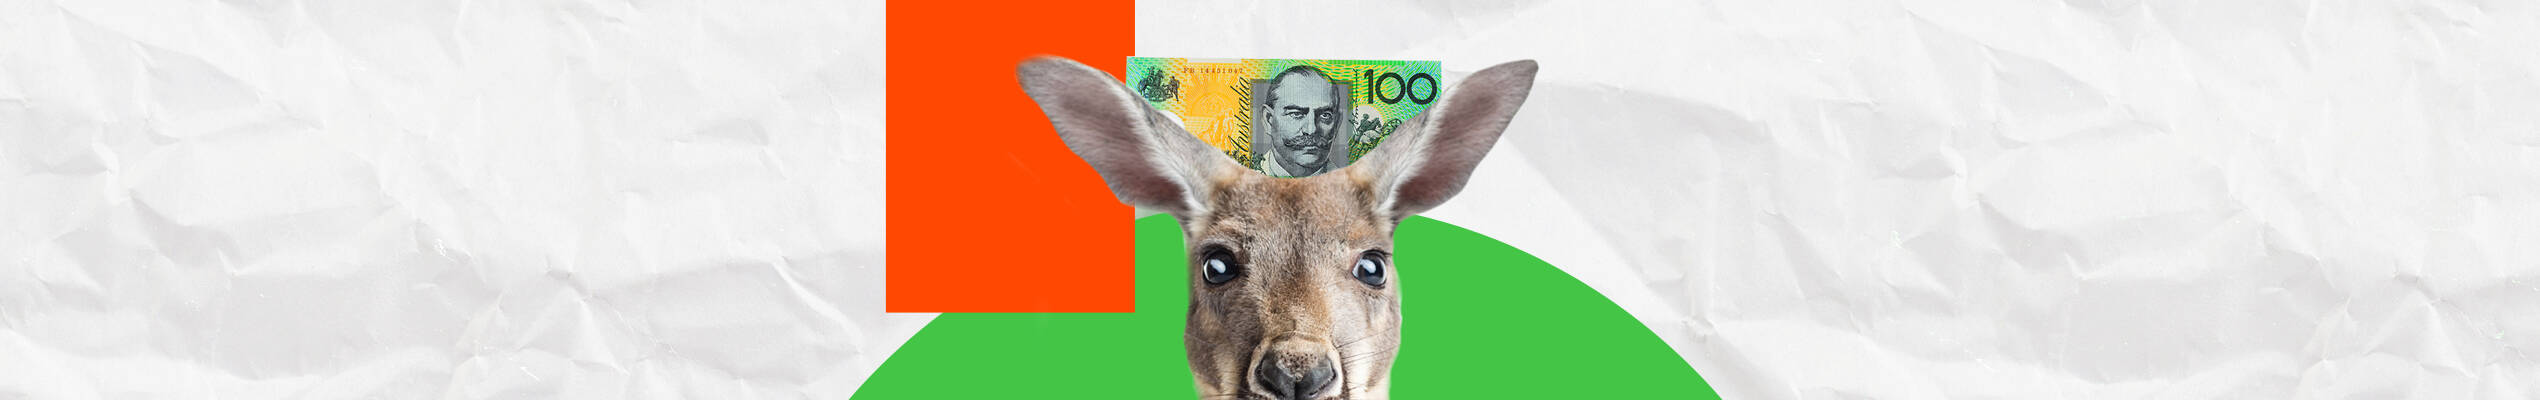 AUD/USD: pointing to the upside?